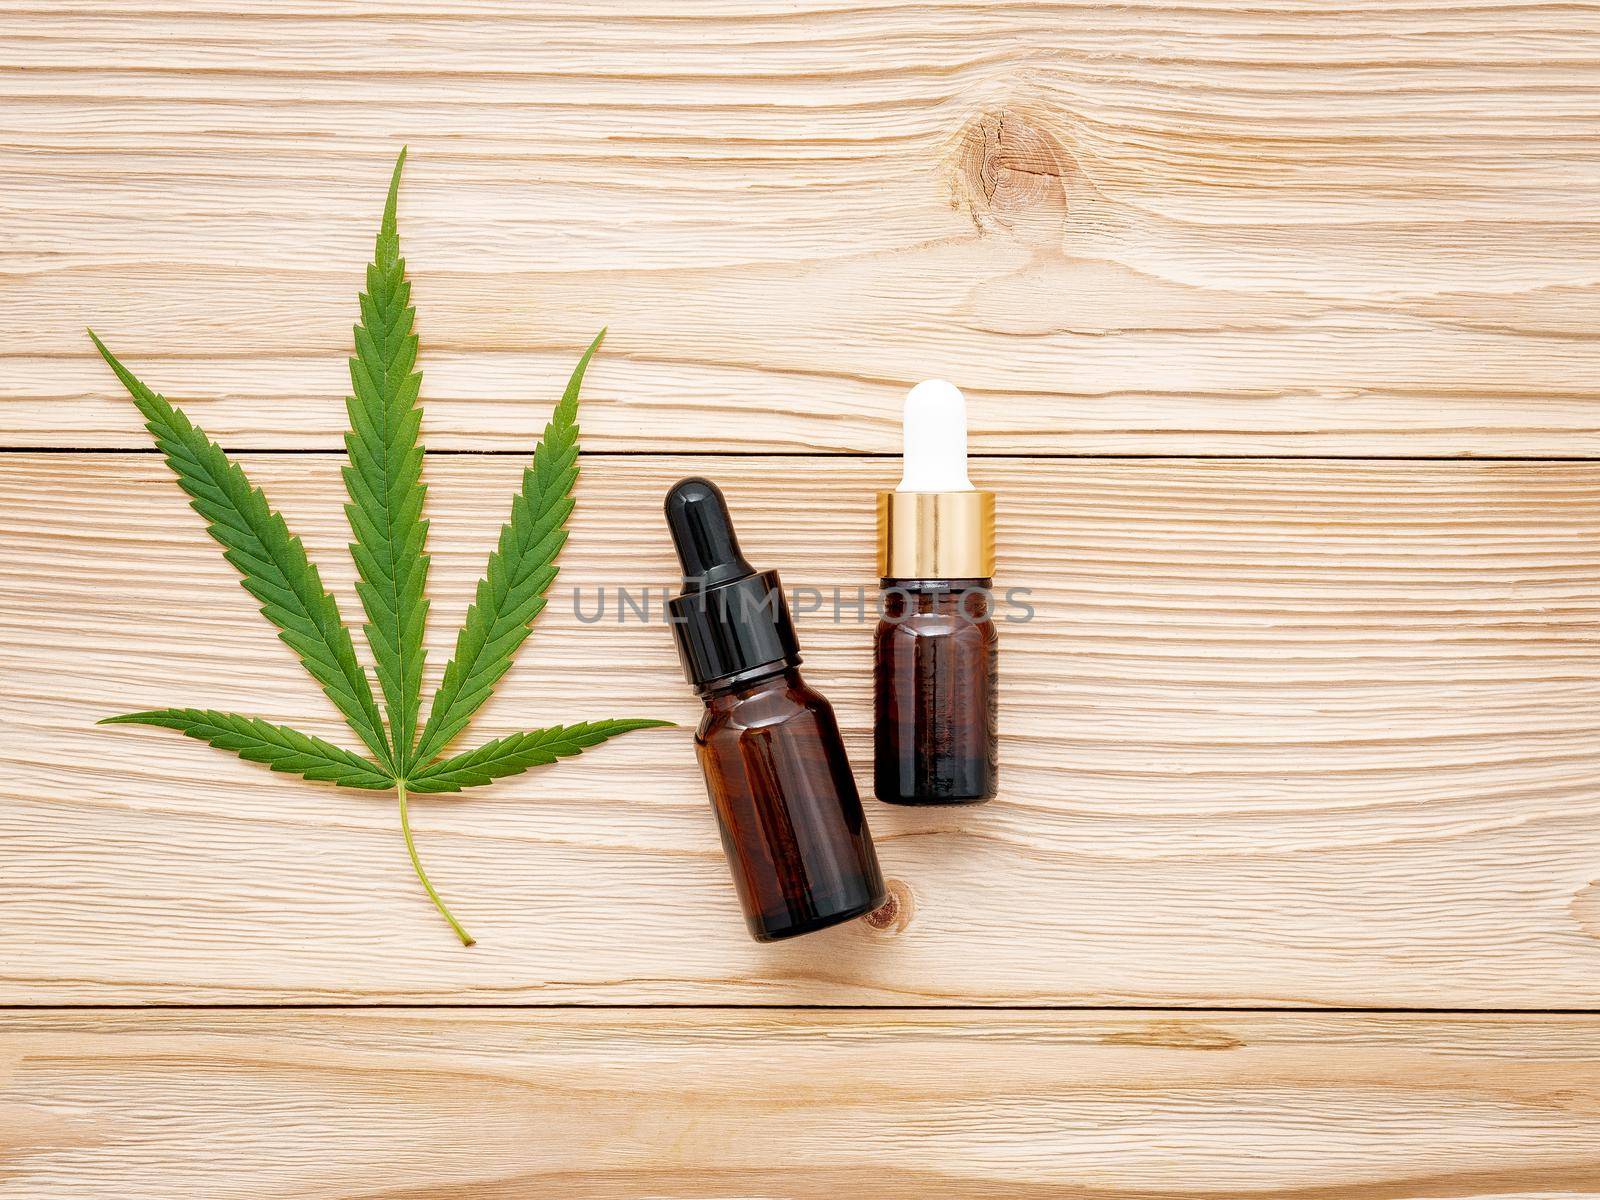 Glass bottle of cannabis oil and hemp leaves set up  on wooden background. by kerdkanno